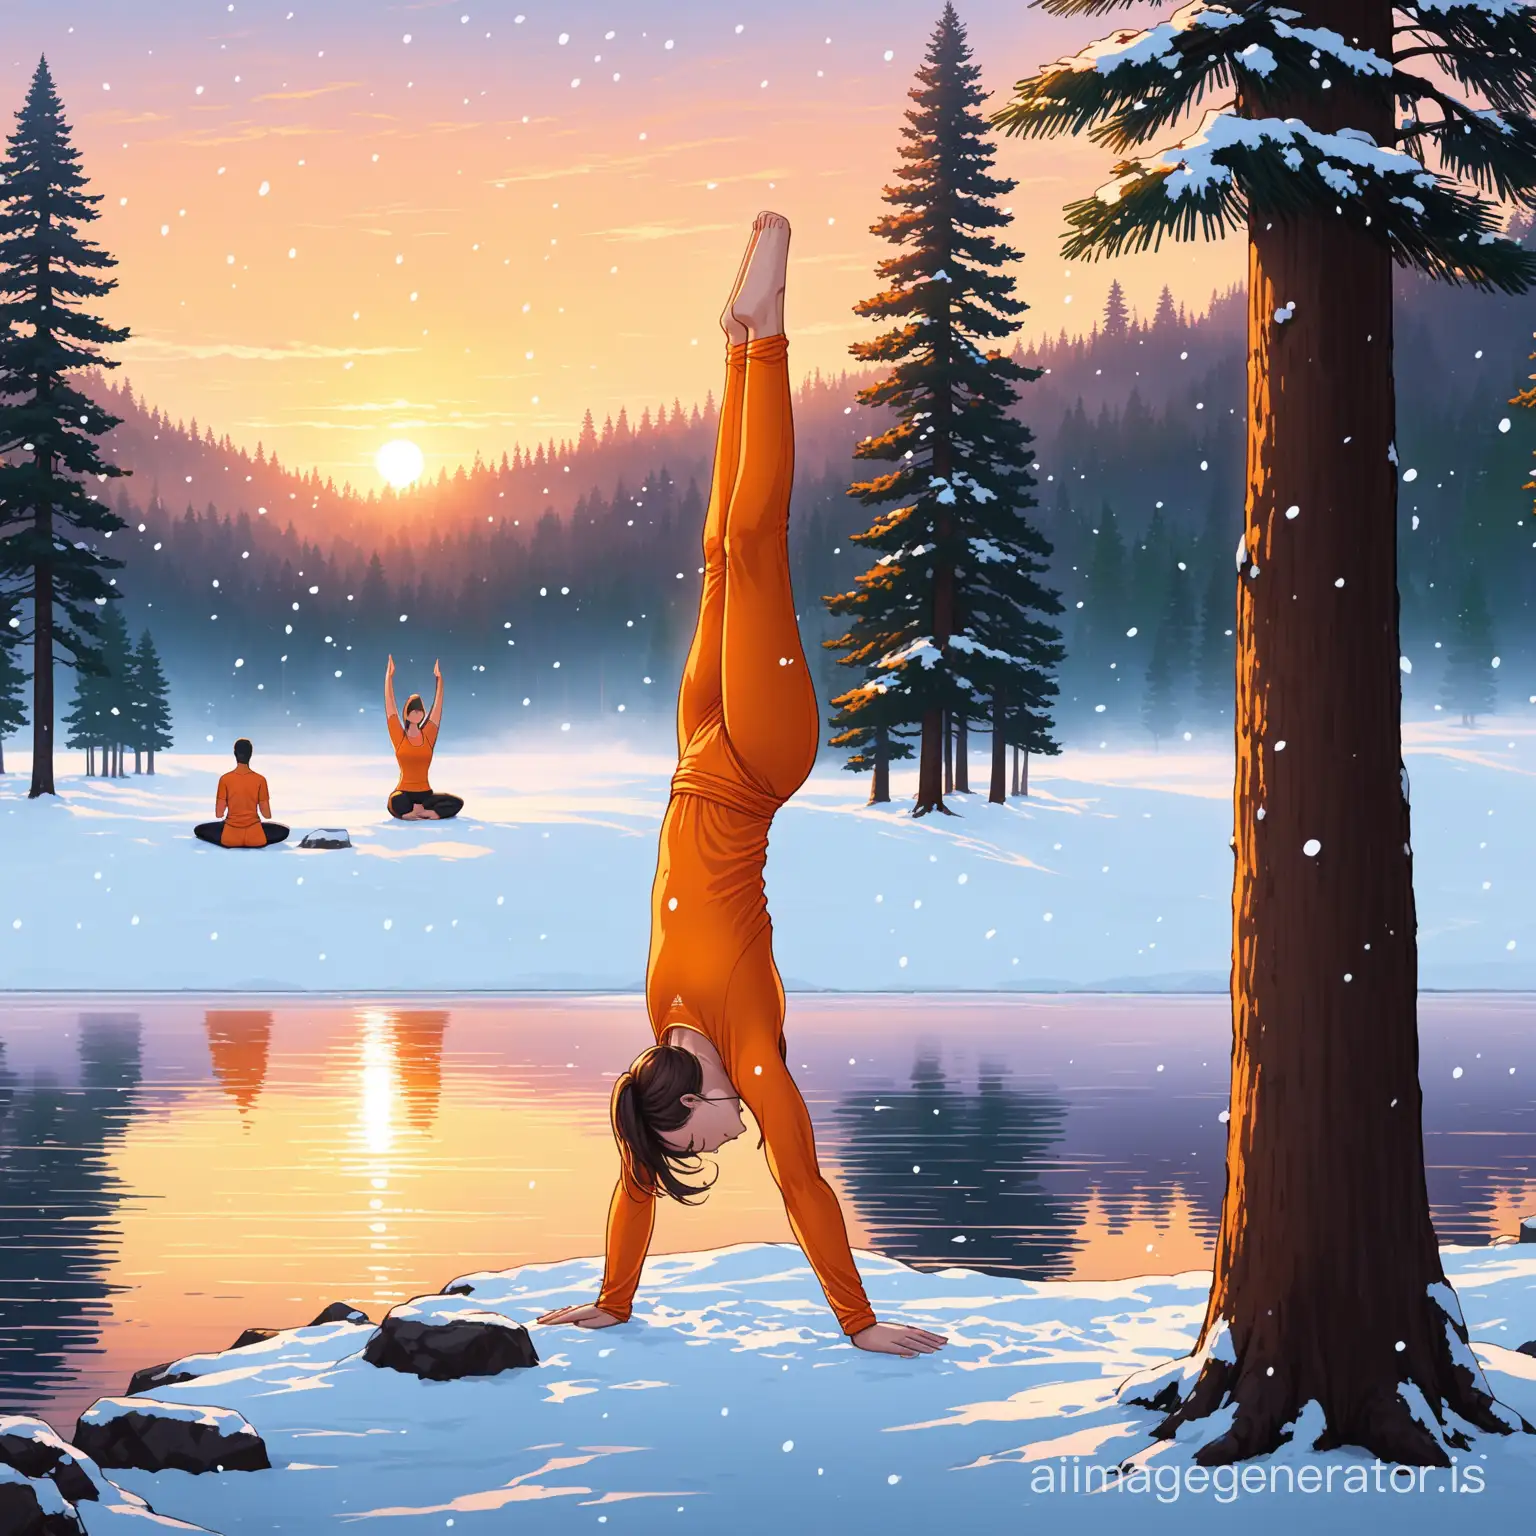 draw a yoga teacher in orange clothing performing a headstand on the shore of a lake next to pine trees with snow falling and several students sitting nearby at dawn